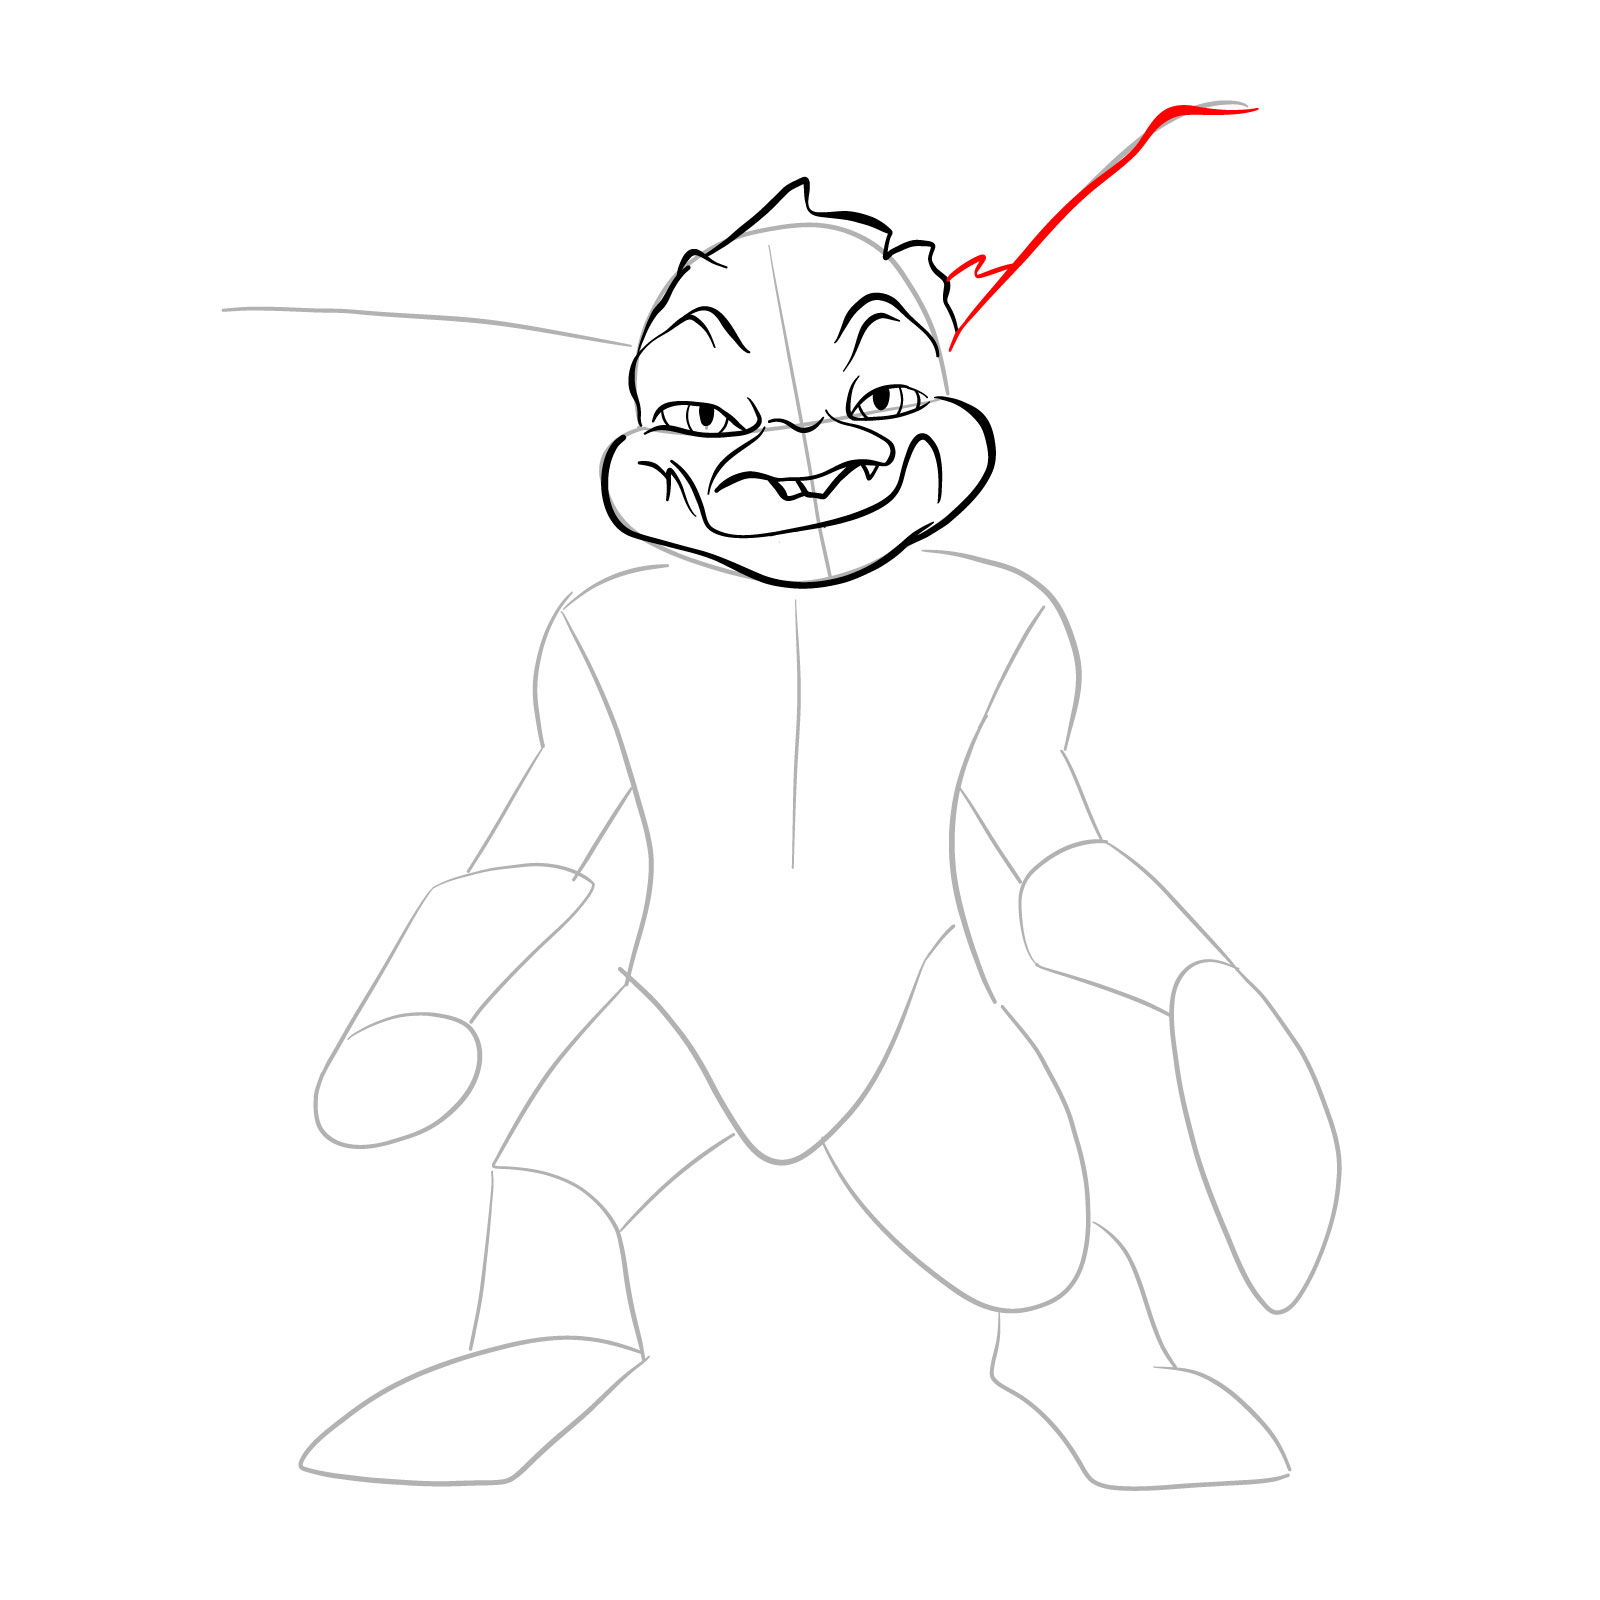 How to draw a Goblin - step 11